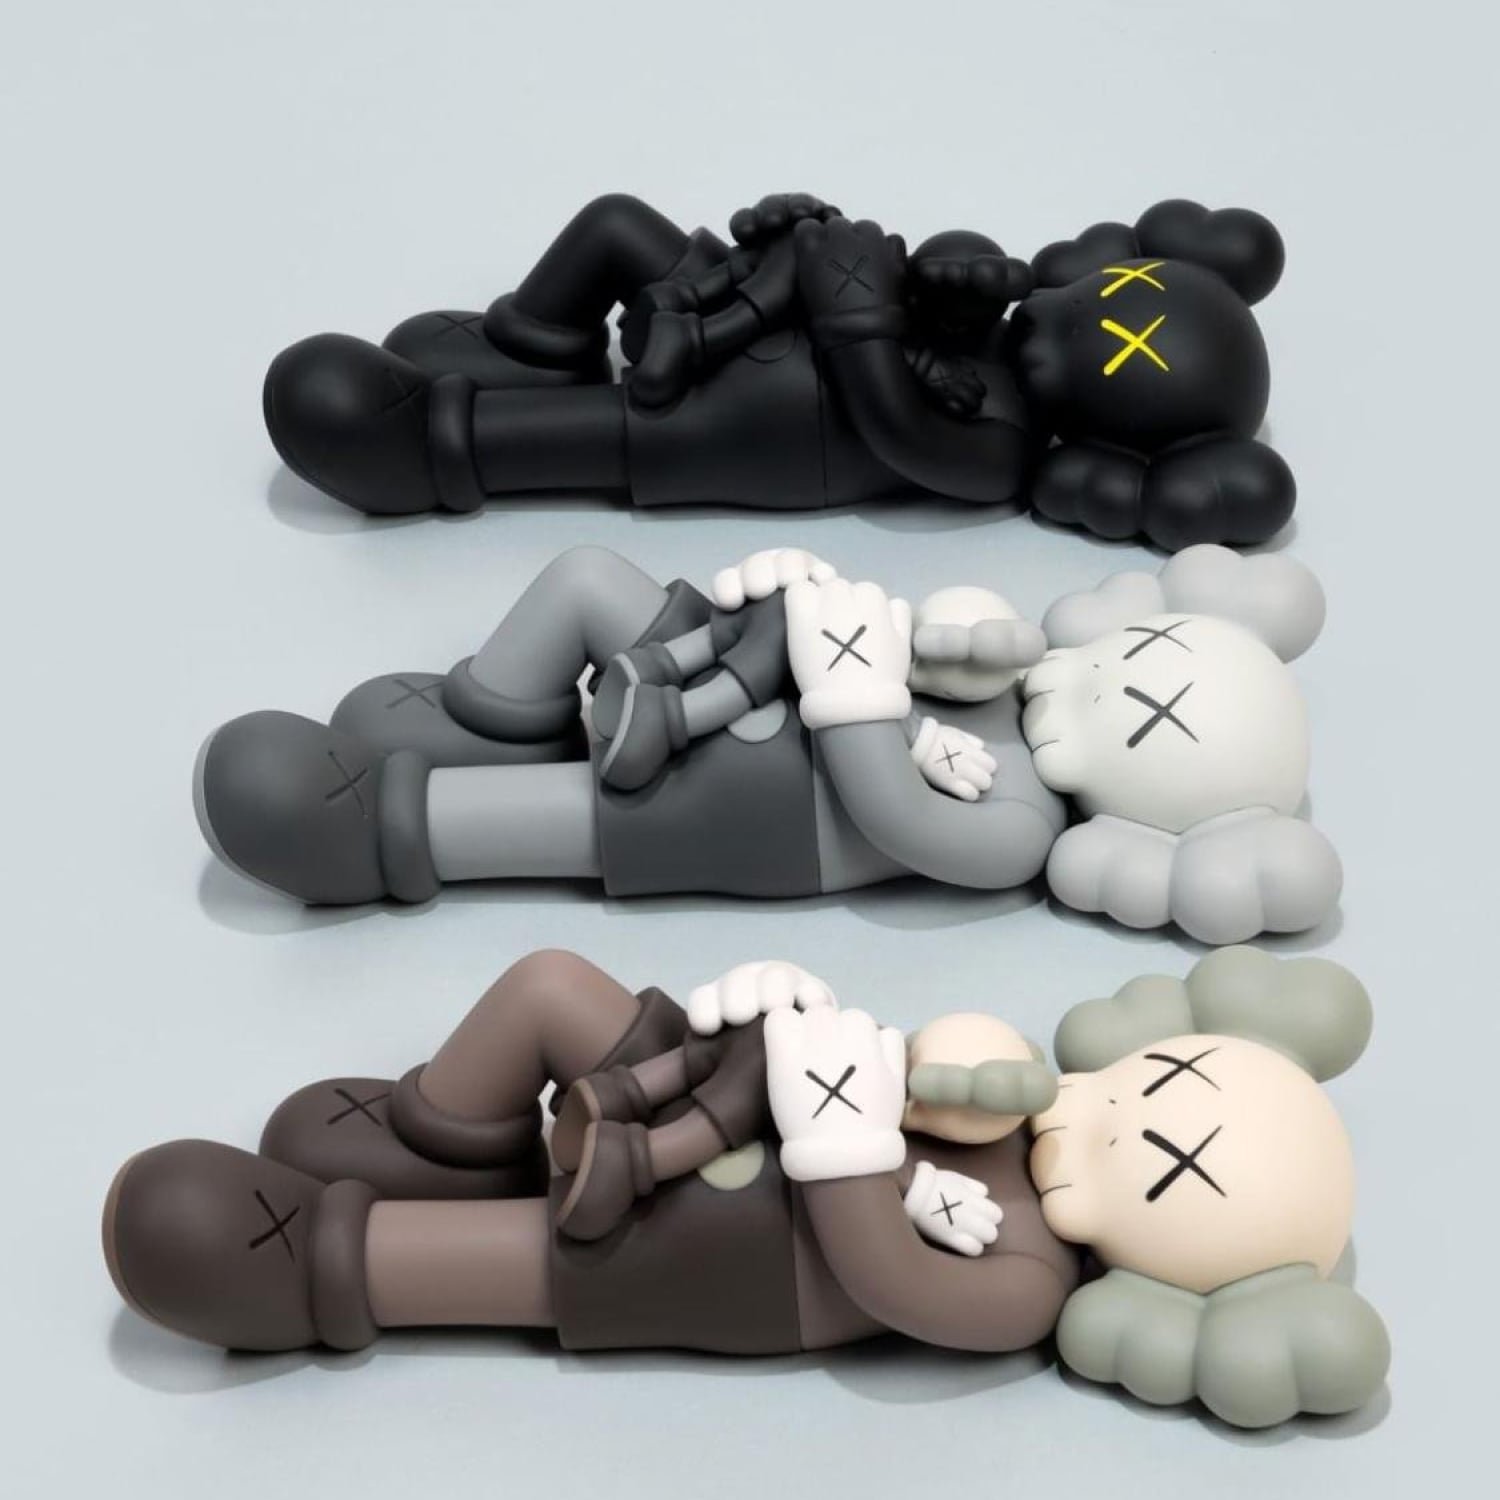 Holiday Singapore set of 3 sculpture by Kaws - Dope! Gallery